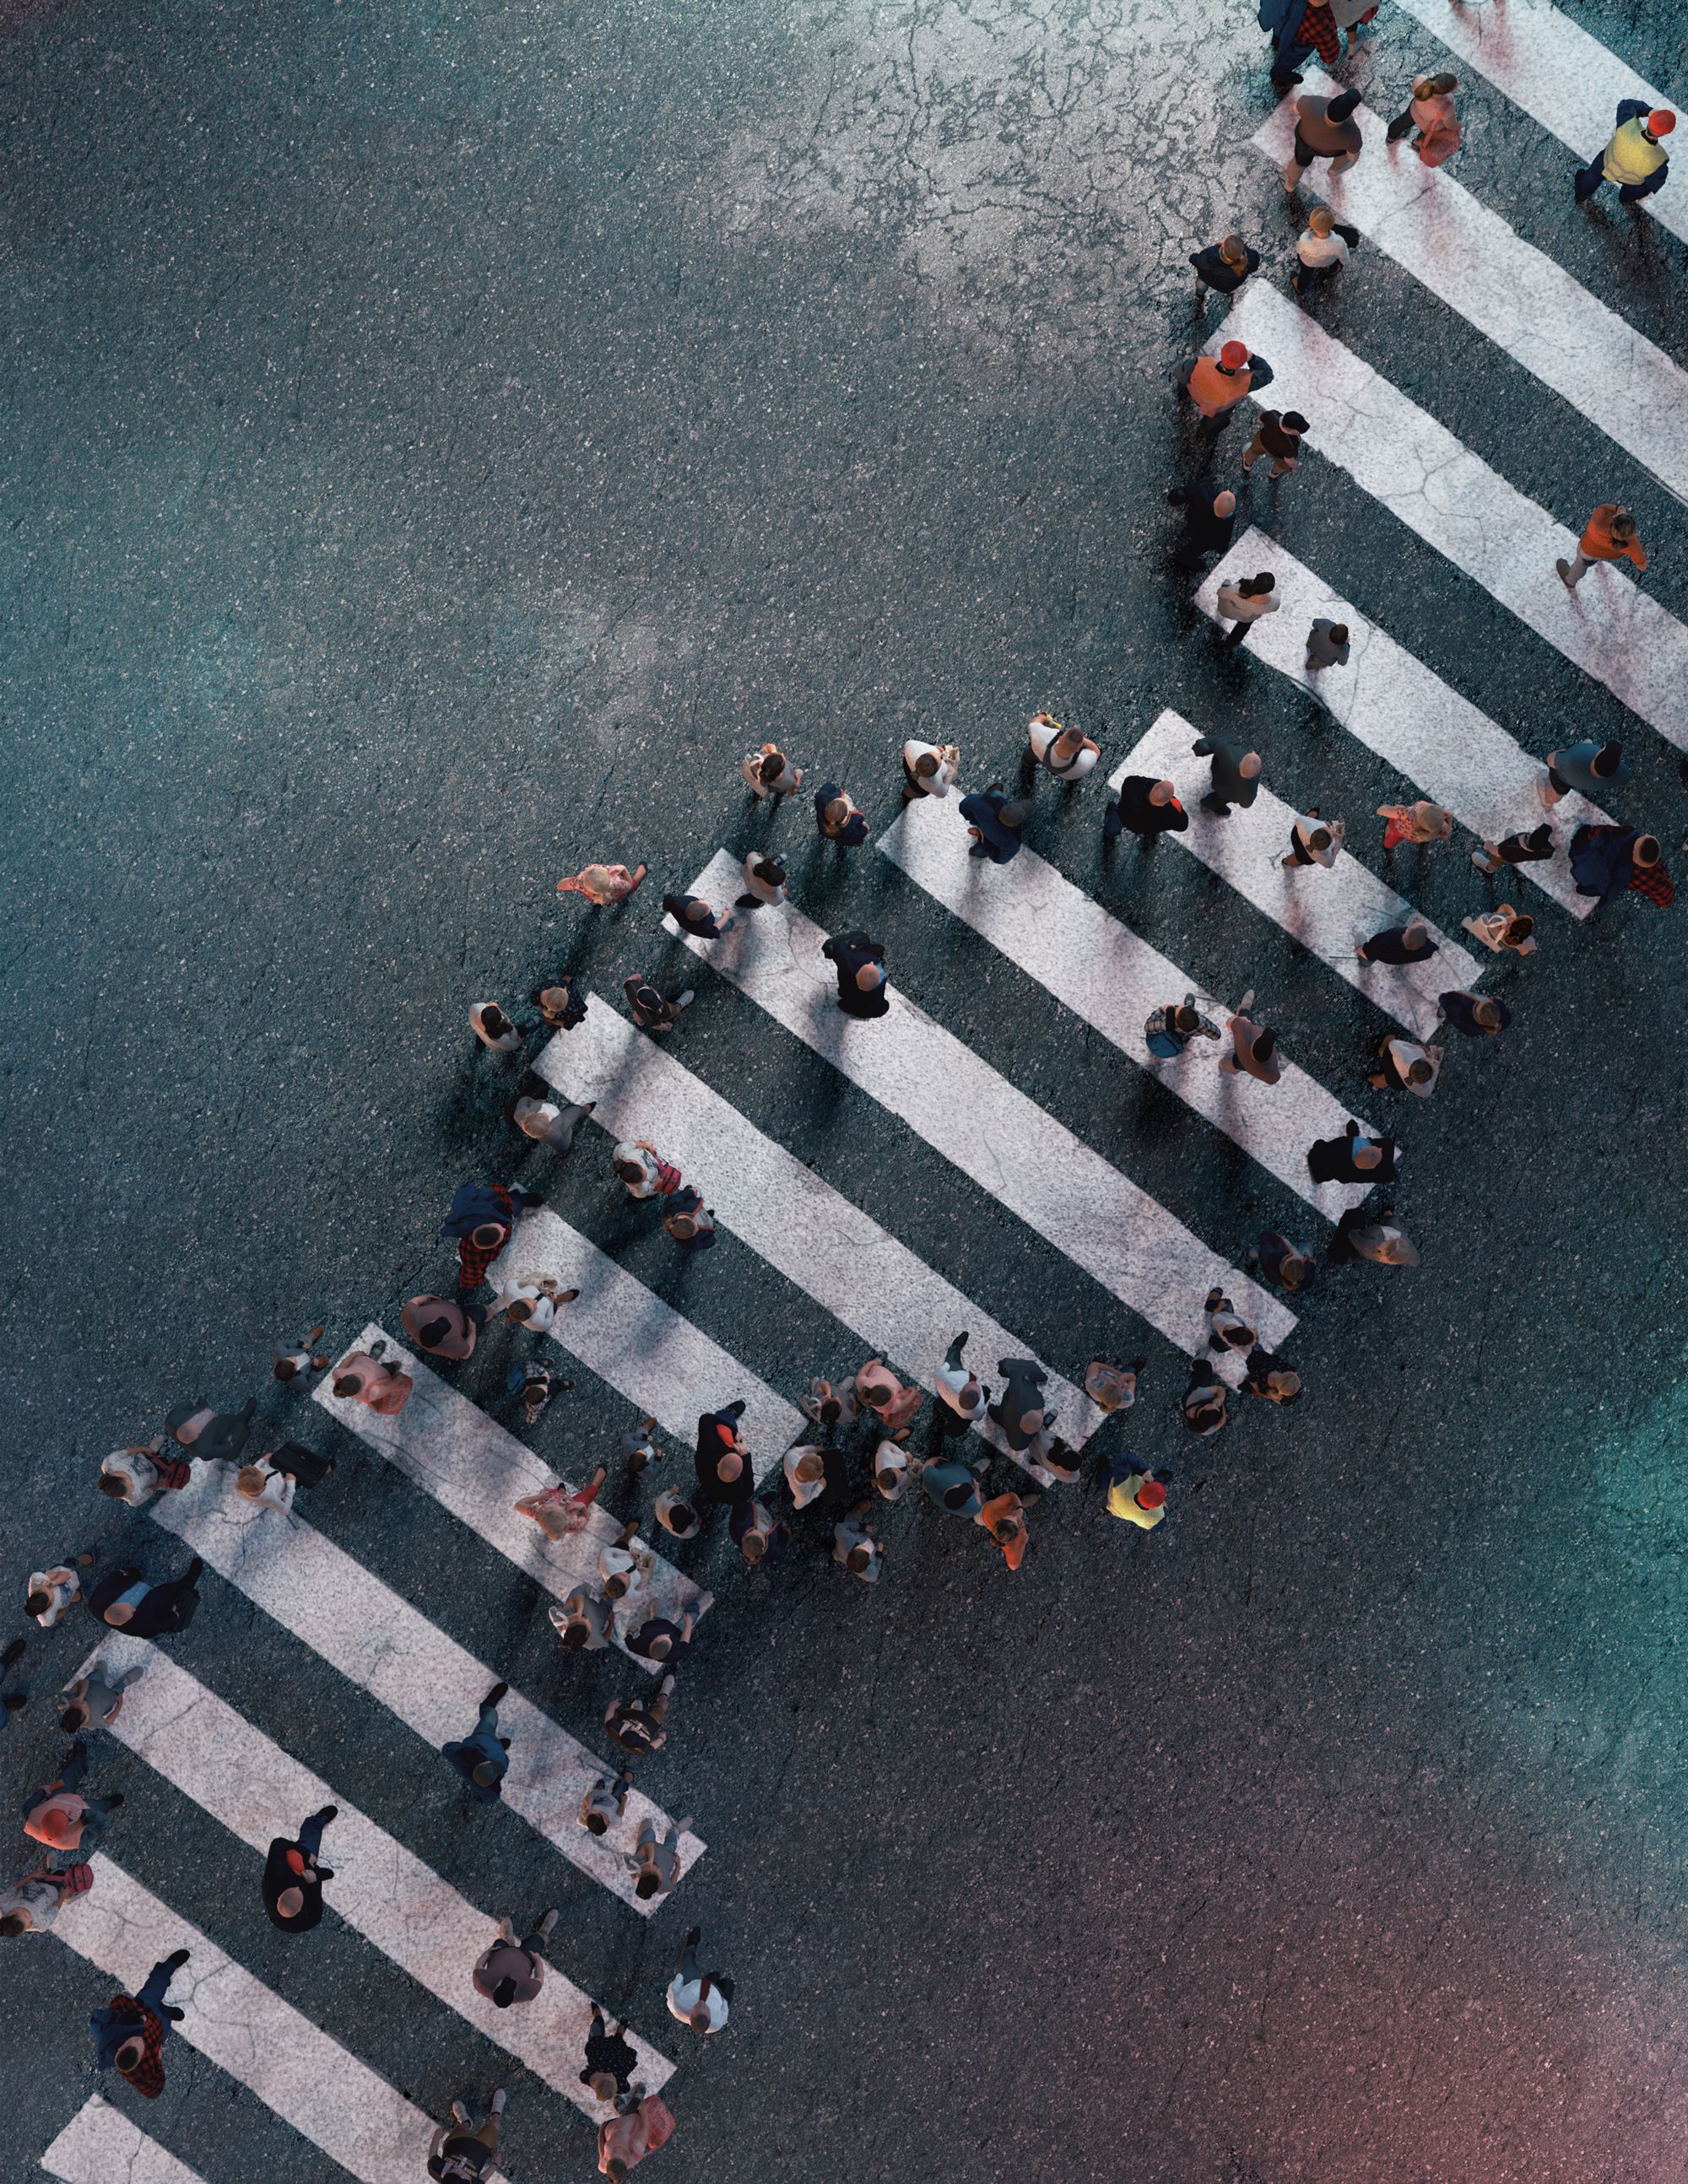 A group of people walking on a zebra crossing, where the stripes have been painted to represent DNA.